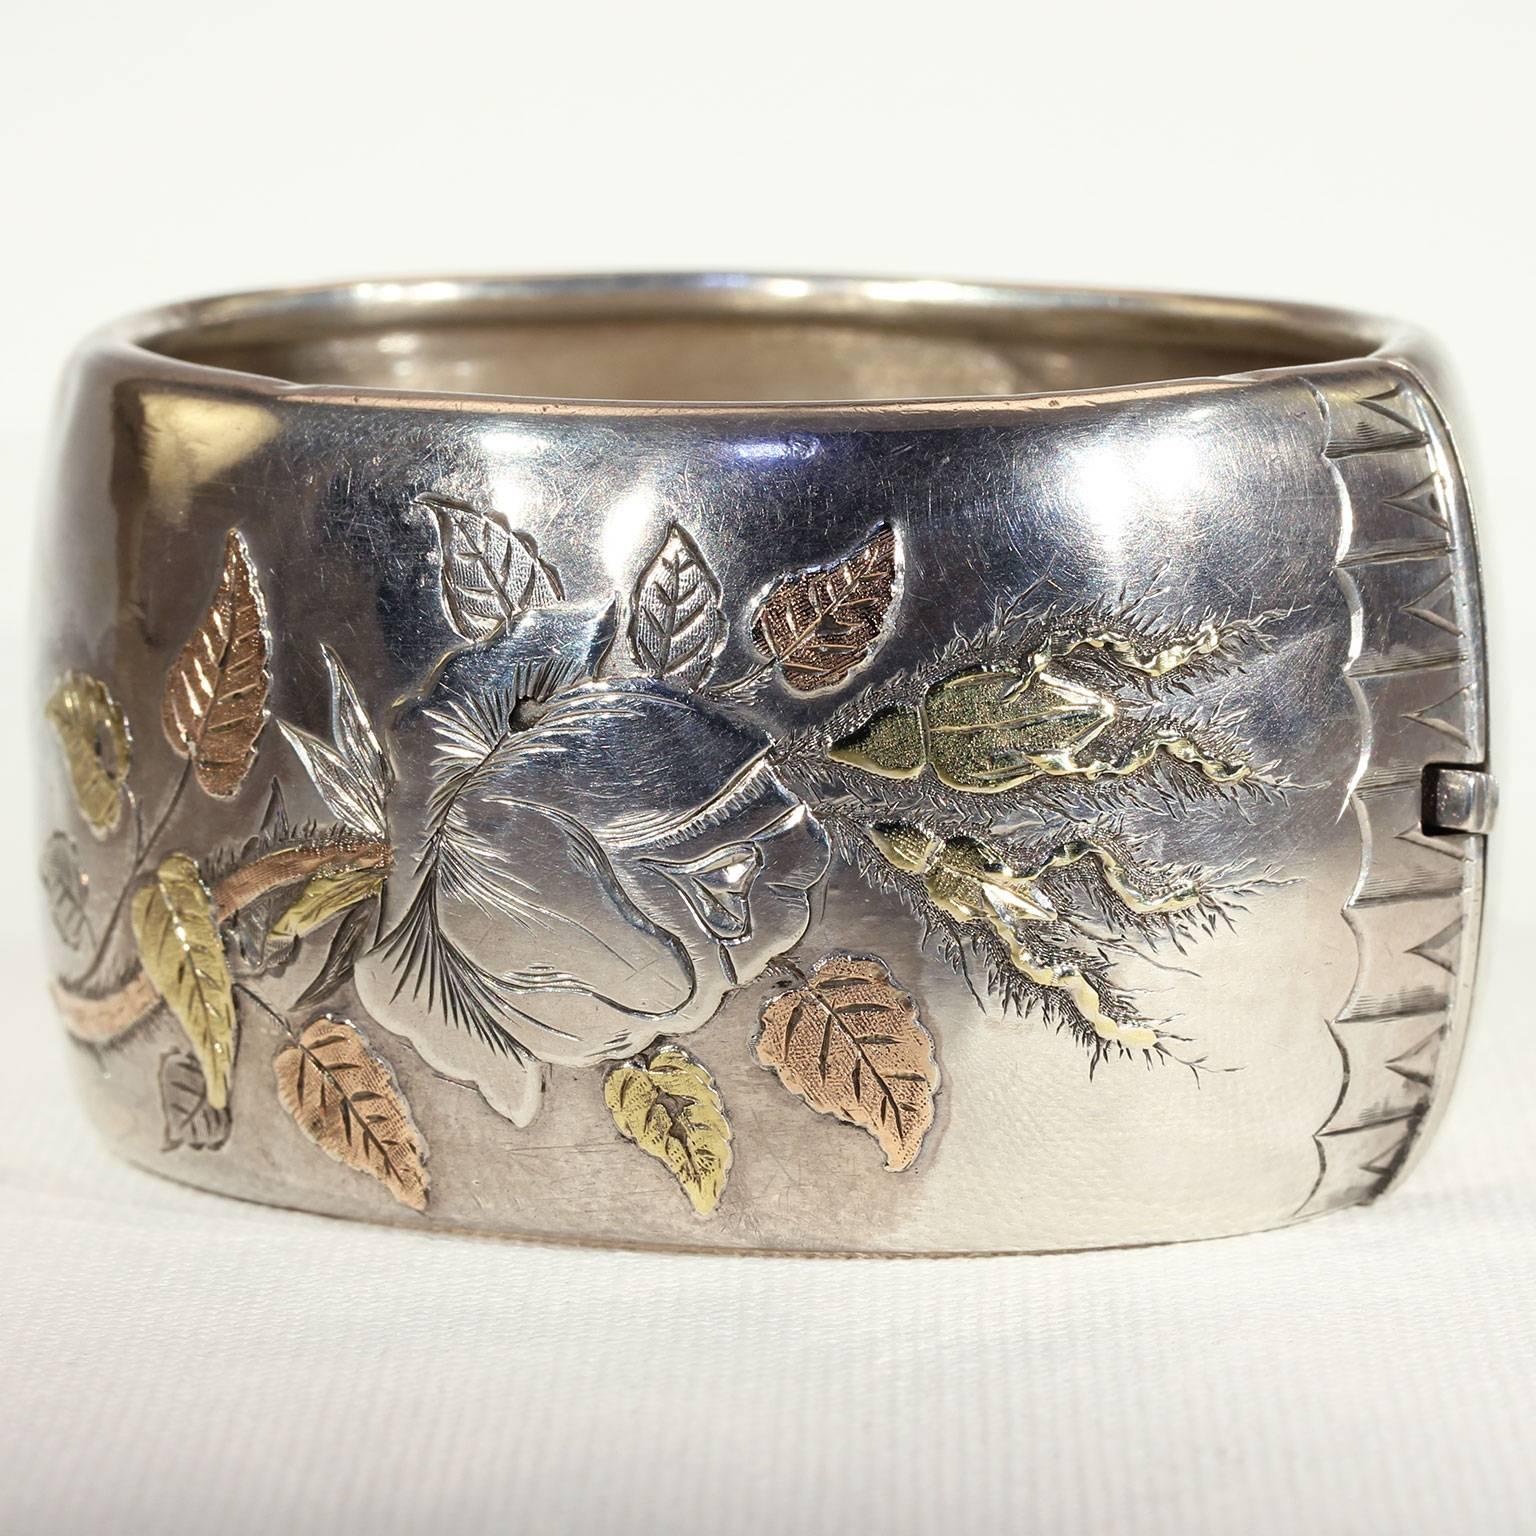 Bangles are for dancing, preferably outside beneath the rays of the sun, so the light can bounce off the silver. This graceful Victorian silver bangle was handcrafted in England around 1880. It features a beautiful engraved motif of a silver flower